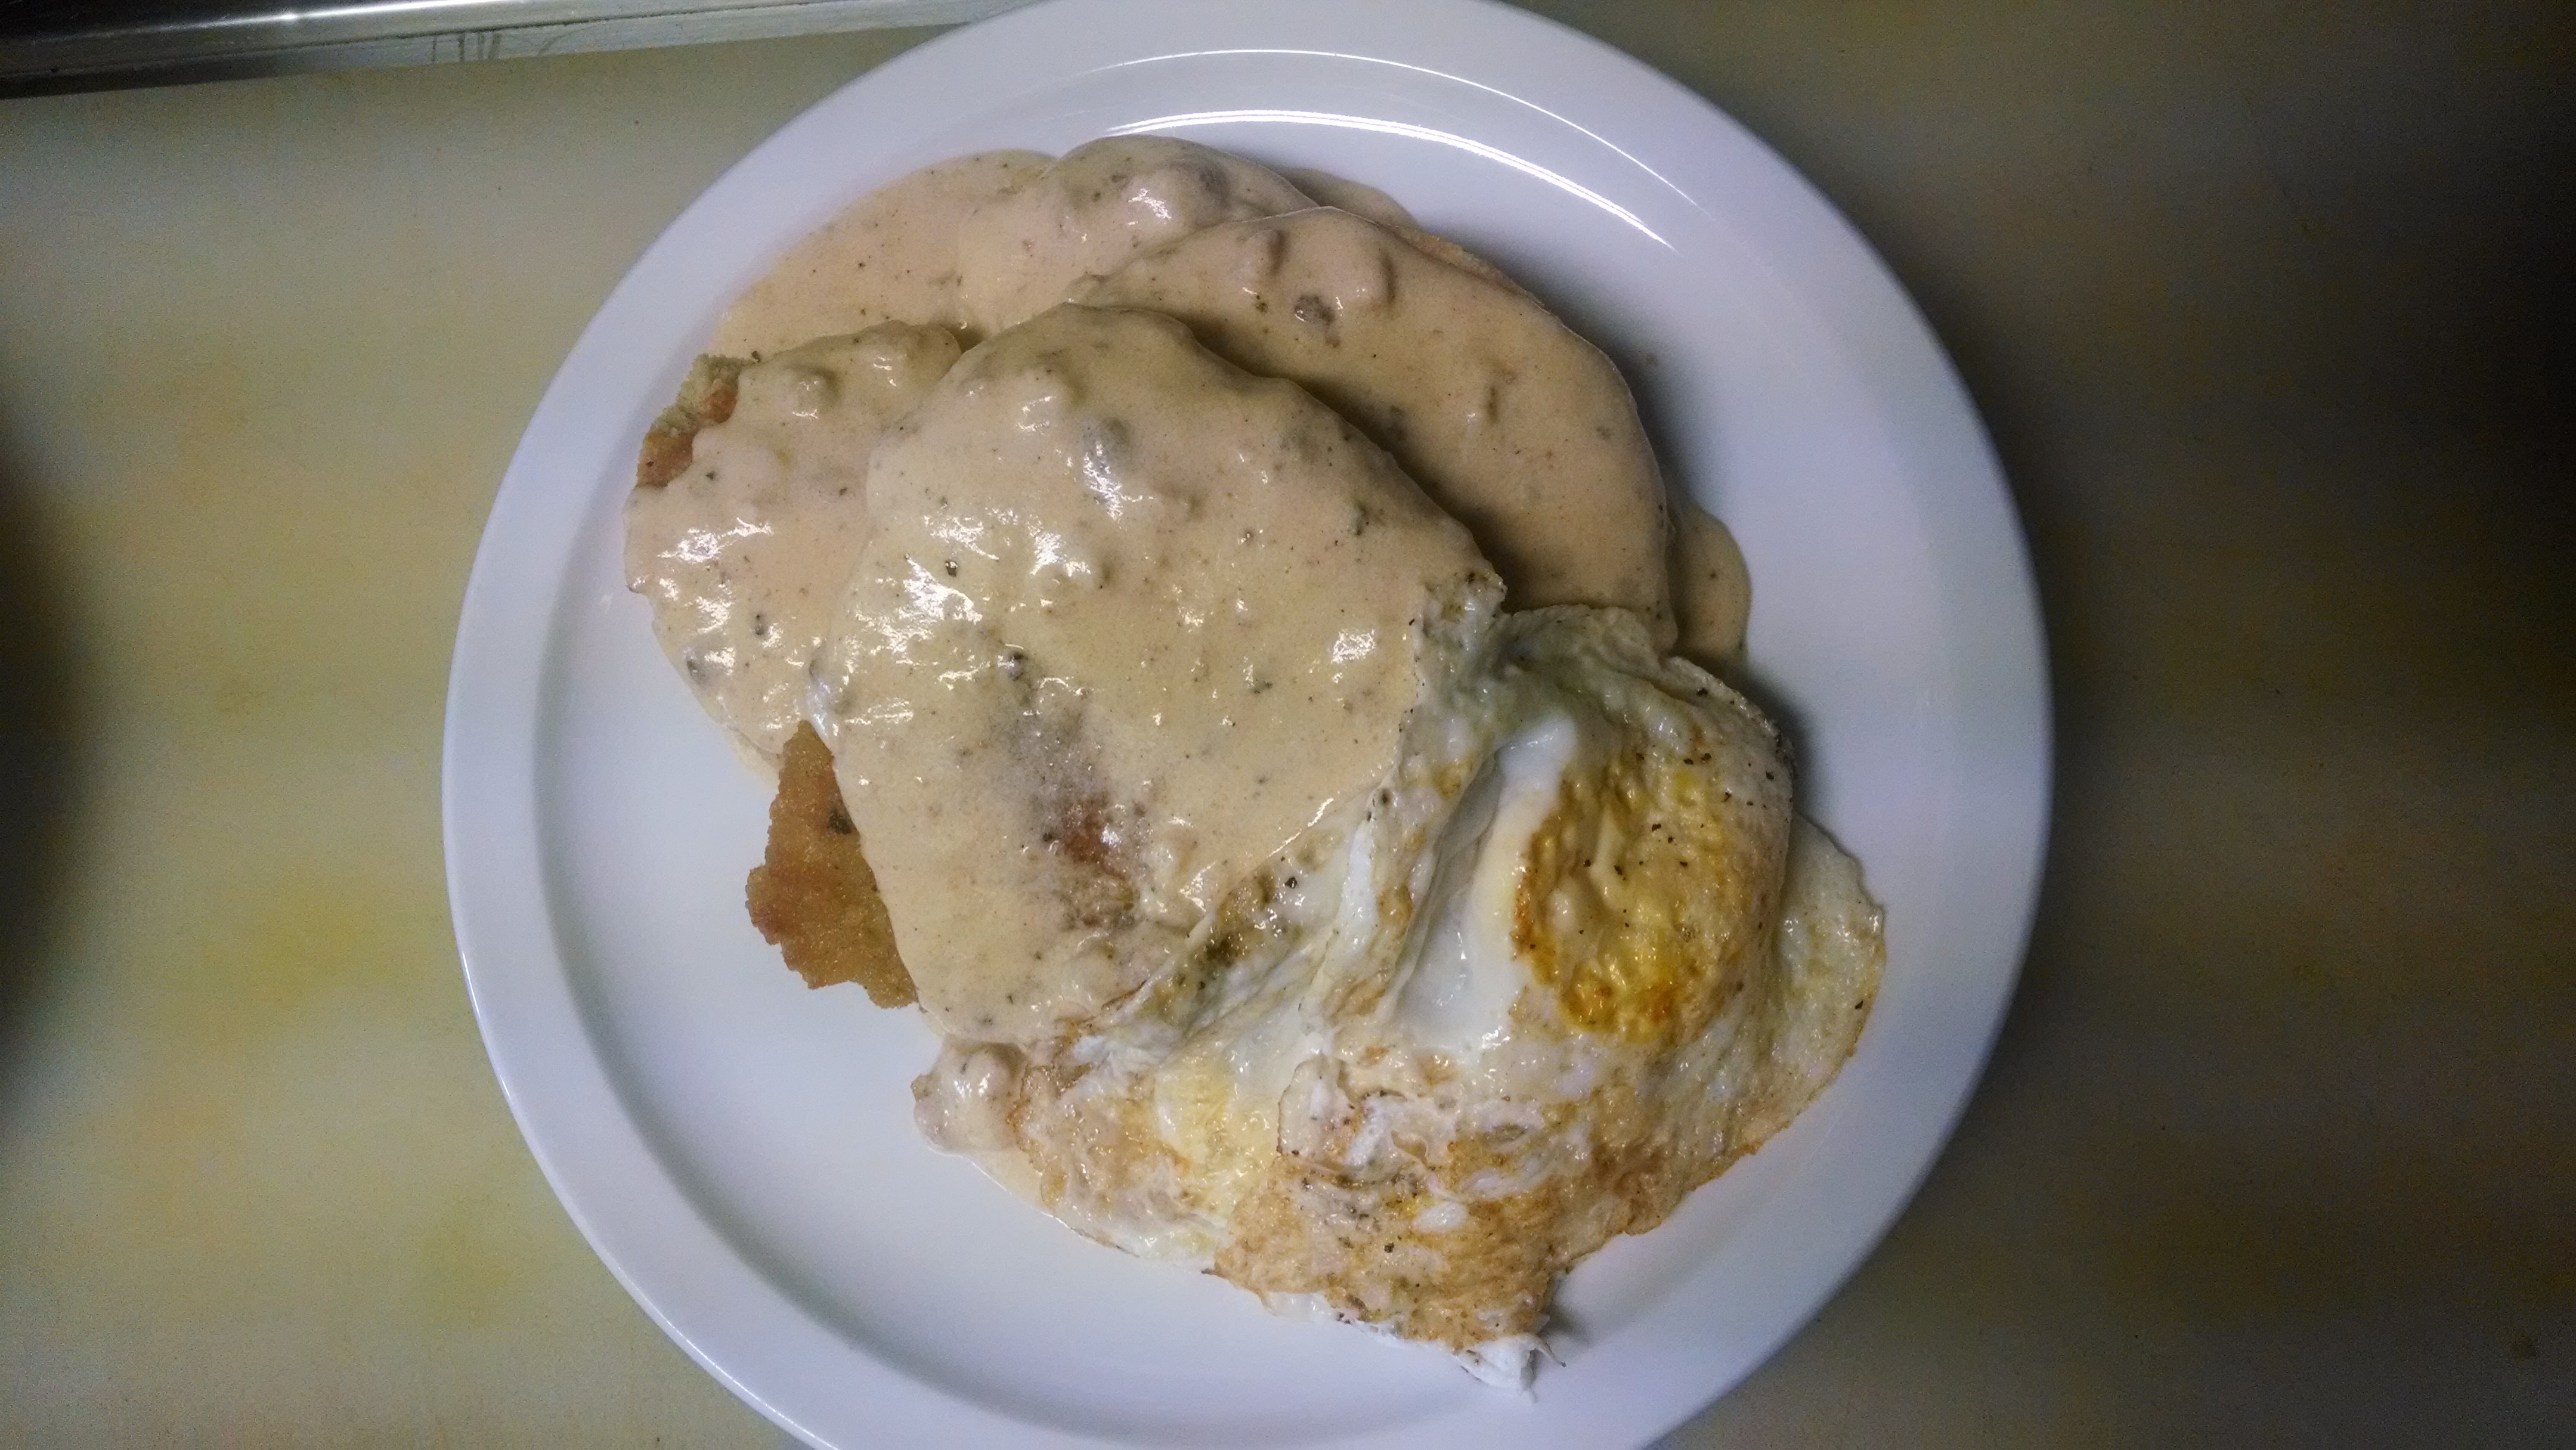 Mmmmm...The Chicken and Biscuit with 2 eggs smothered in rosemary sausage gravy.... Bare Bones Cafe & Bar Portland (503)719-7128